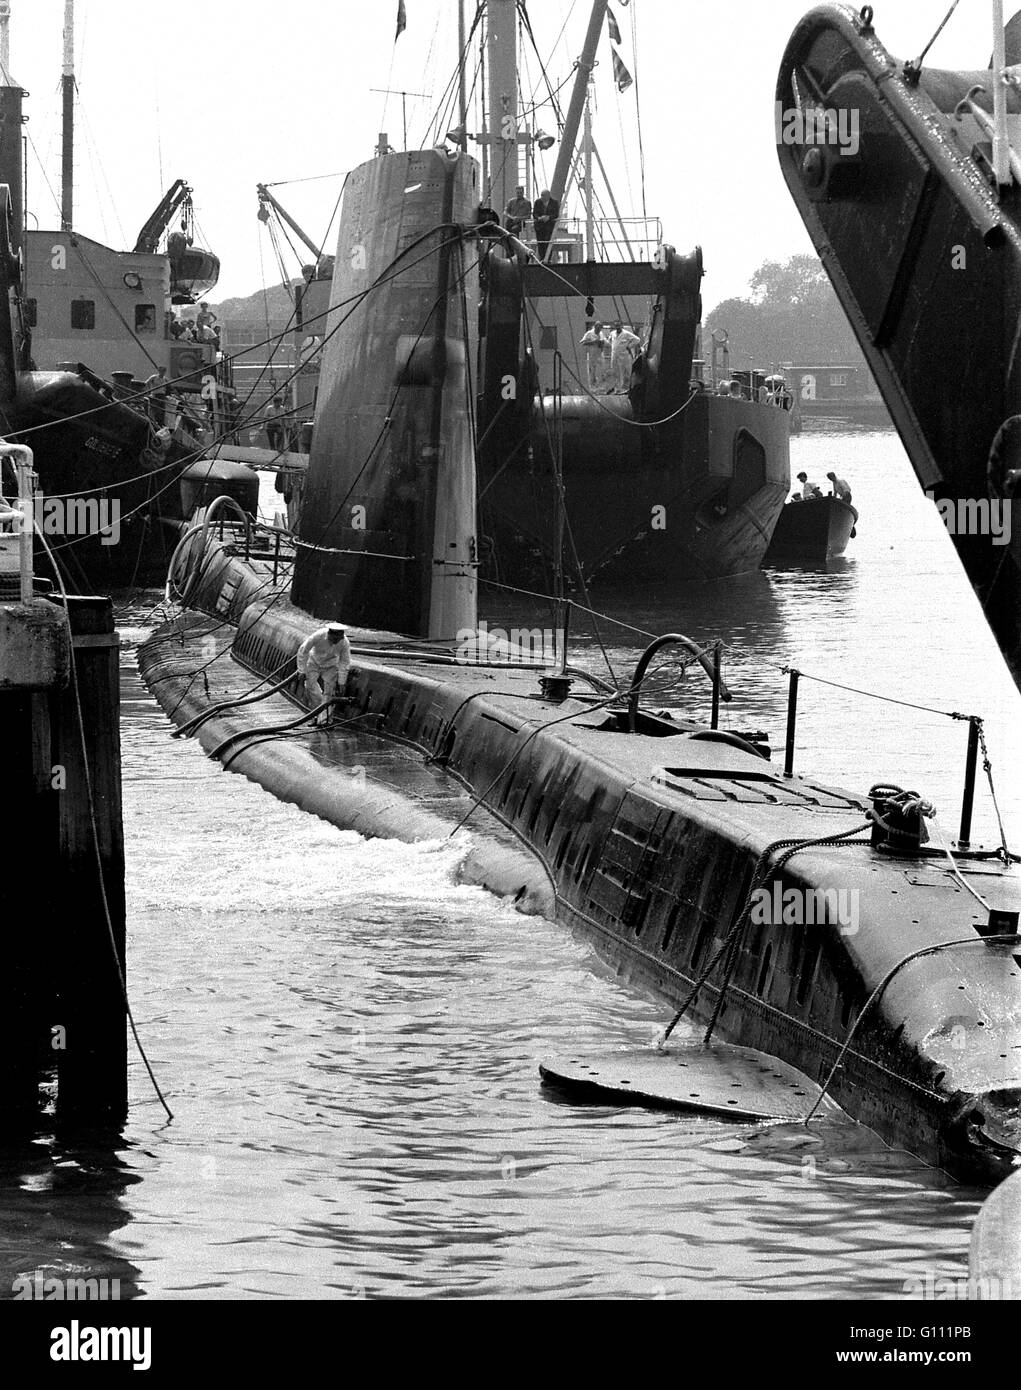 AJAXNETPHOTO. 6TH JULY, 1971. GOSPORT, ENGLAND.SUBMARINE HMS ARTEMIS 1,120 TONS, RISING TO THE SURFACE AT THE ROYAL NAVY SUBMARINE BASE HMS DOLPHIN WHICH SANK TRAPPING THREE CREW INSIDE FOR 10 HOURS ALONGSIDE THE QUAY AT HMS DOLPHIN ON JULY 2ND, 1971.  PHOTO:JONATHAN EASTLAND/AJAX. REF:ARTEMIS 71707 2002 Stock Photo